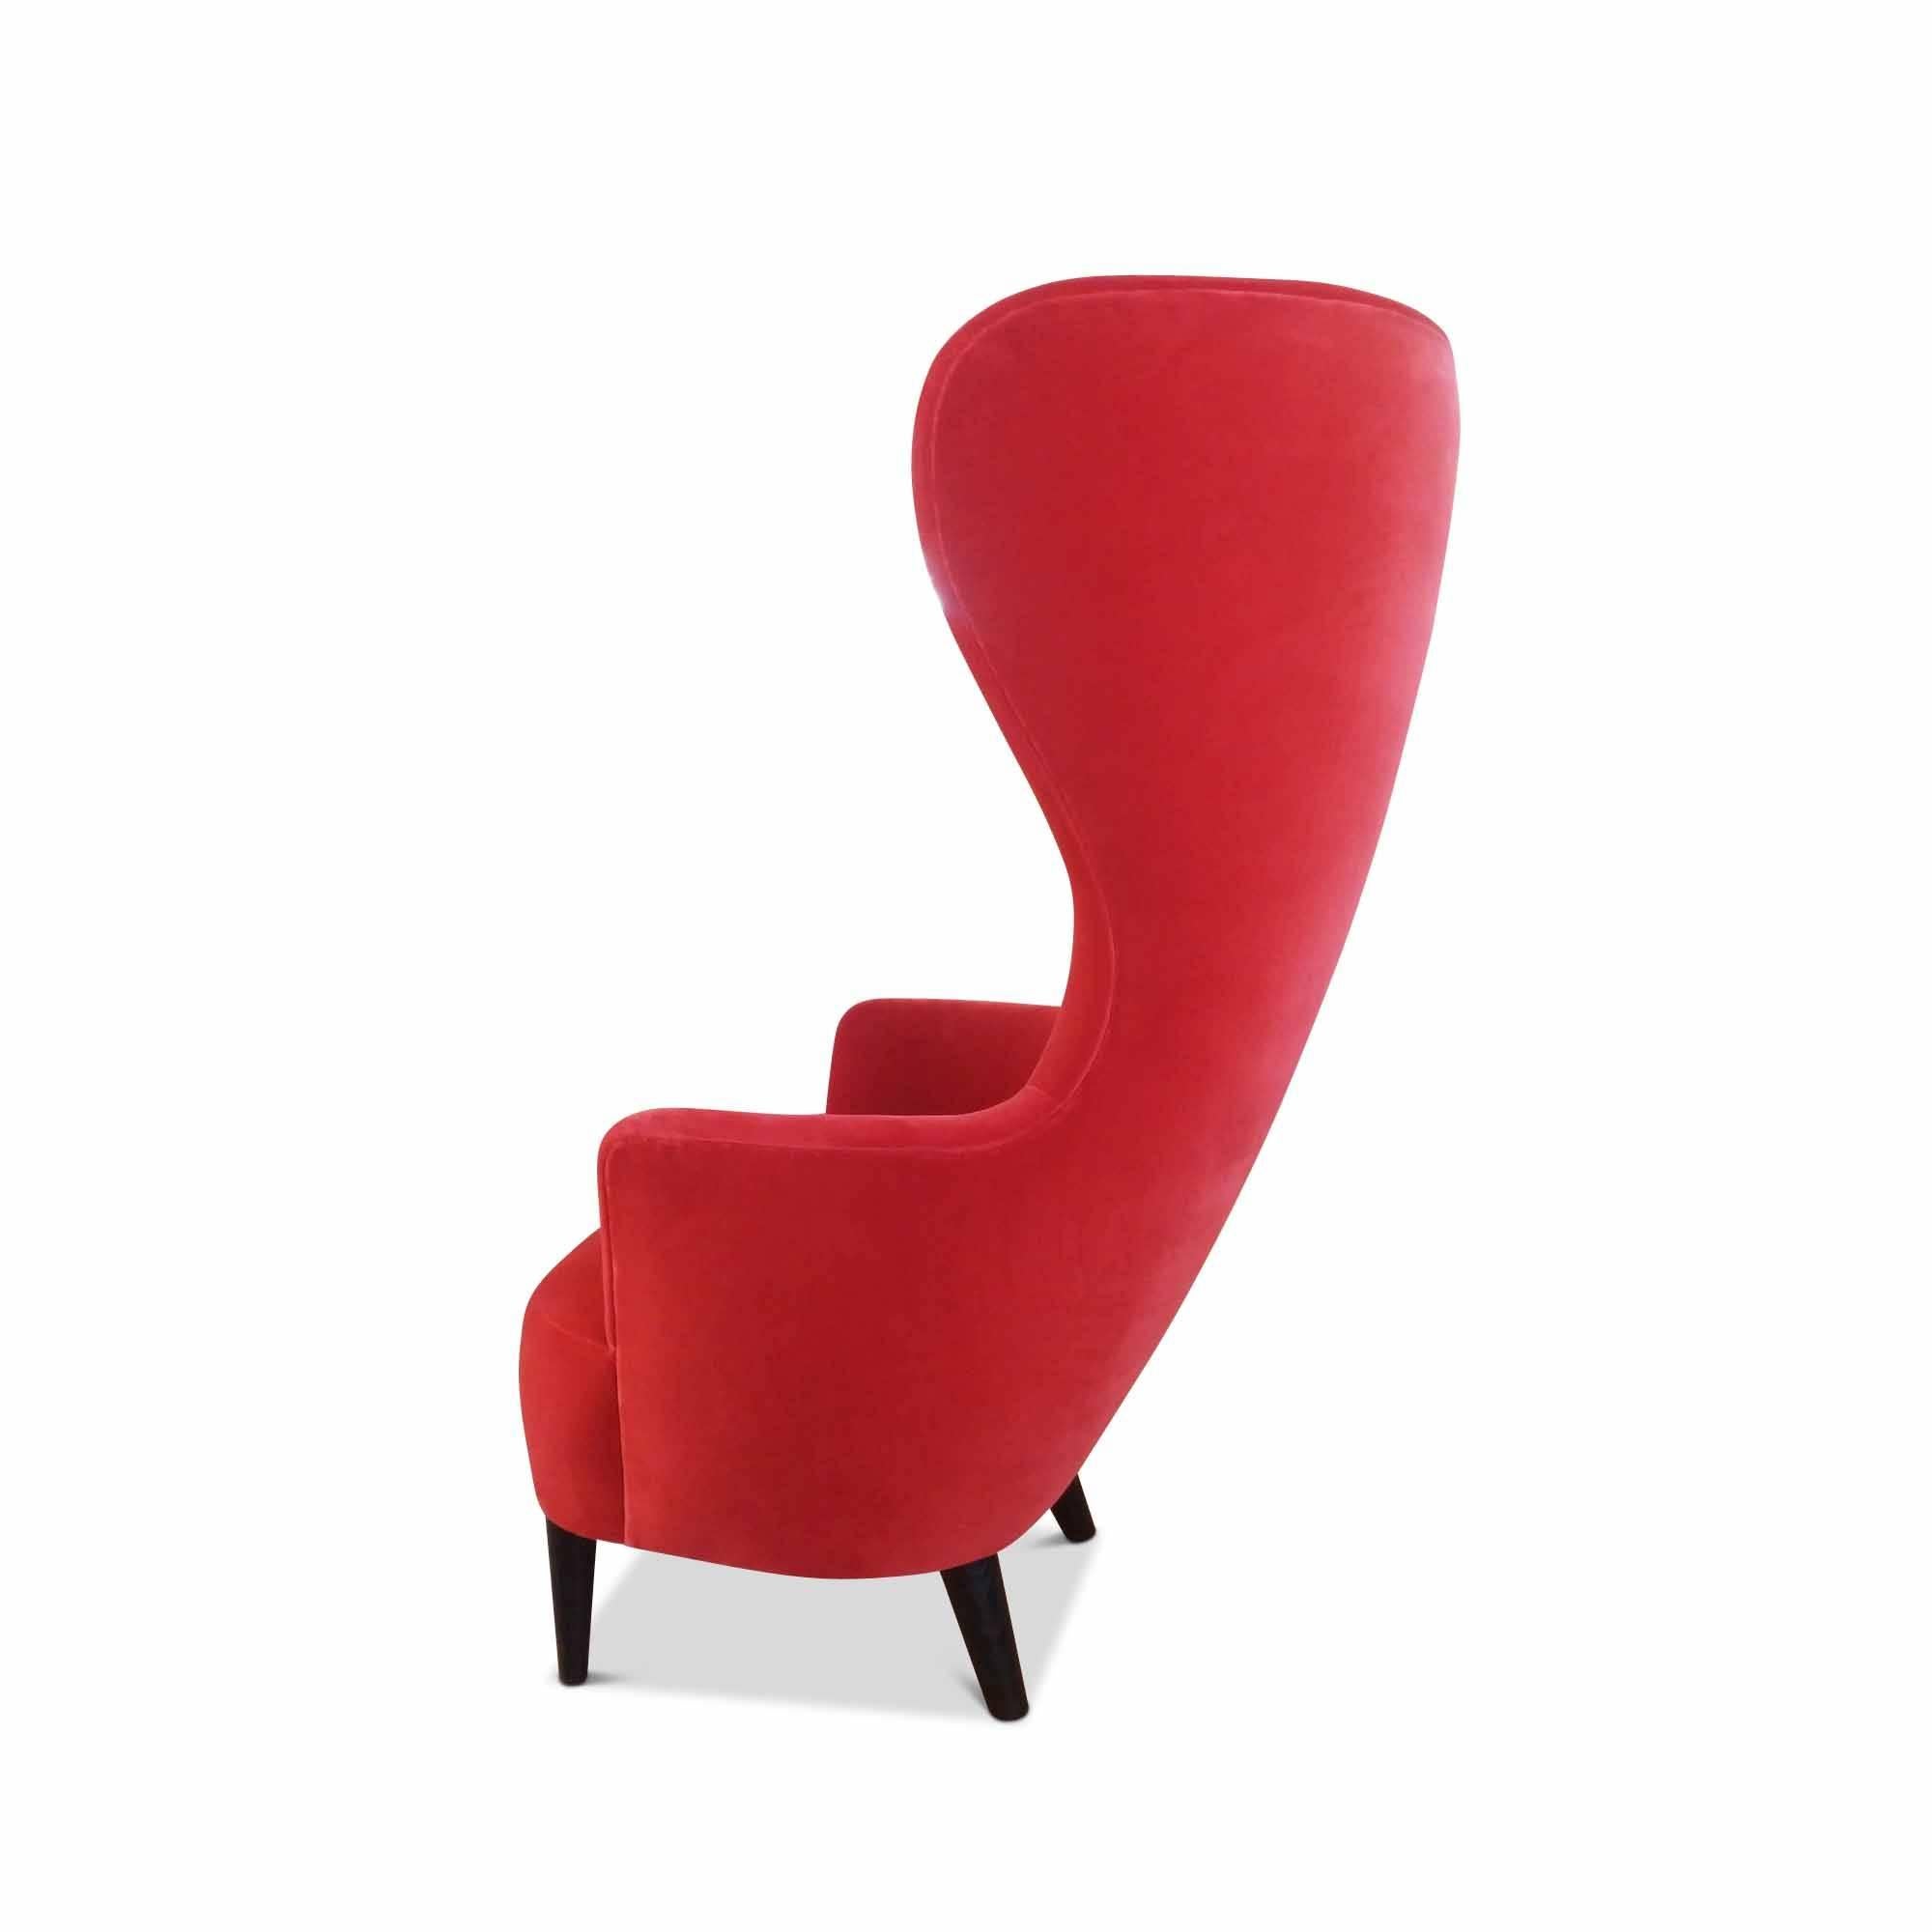 We are delighted to present to you the extravagant armchair “Wingback Chair”, designed and manufactured by Tom Dixon, that unites ambitious design with unrivalled comfort for our exclusive clients. This extraordinary armchair, with a frame of